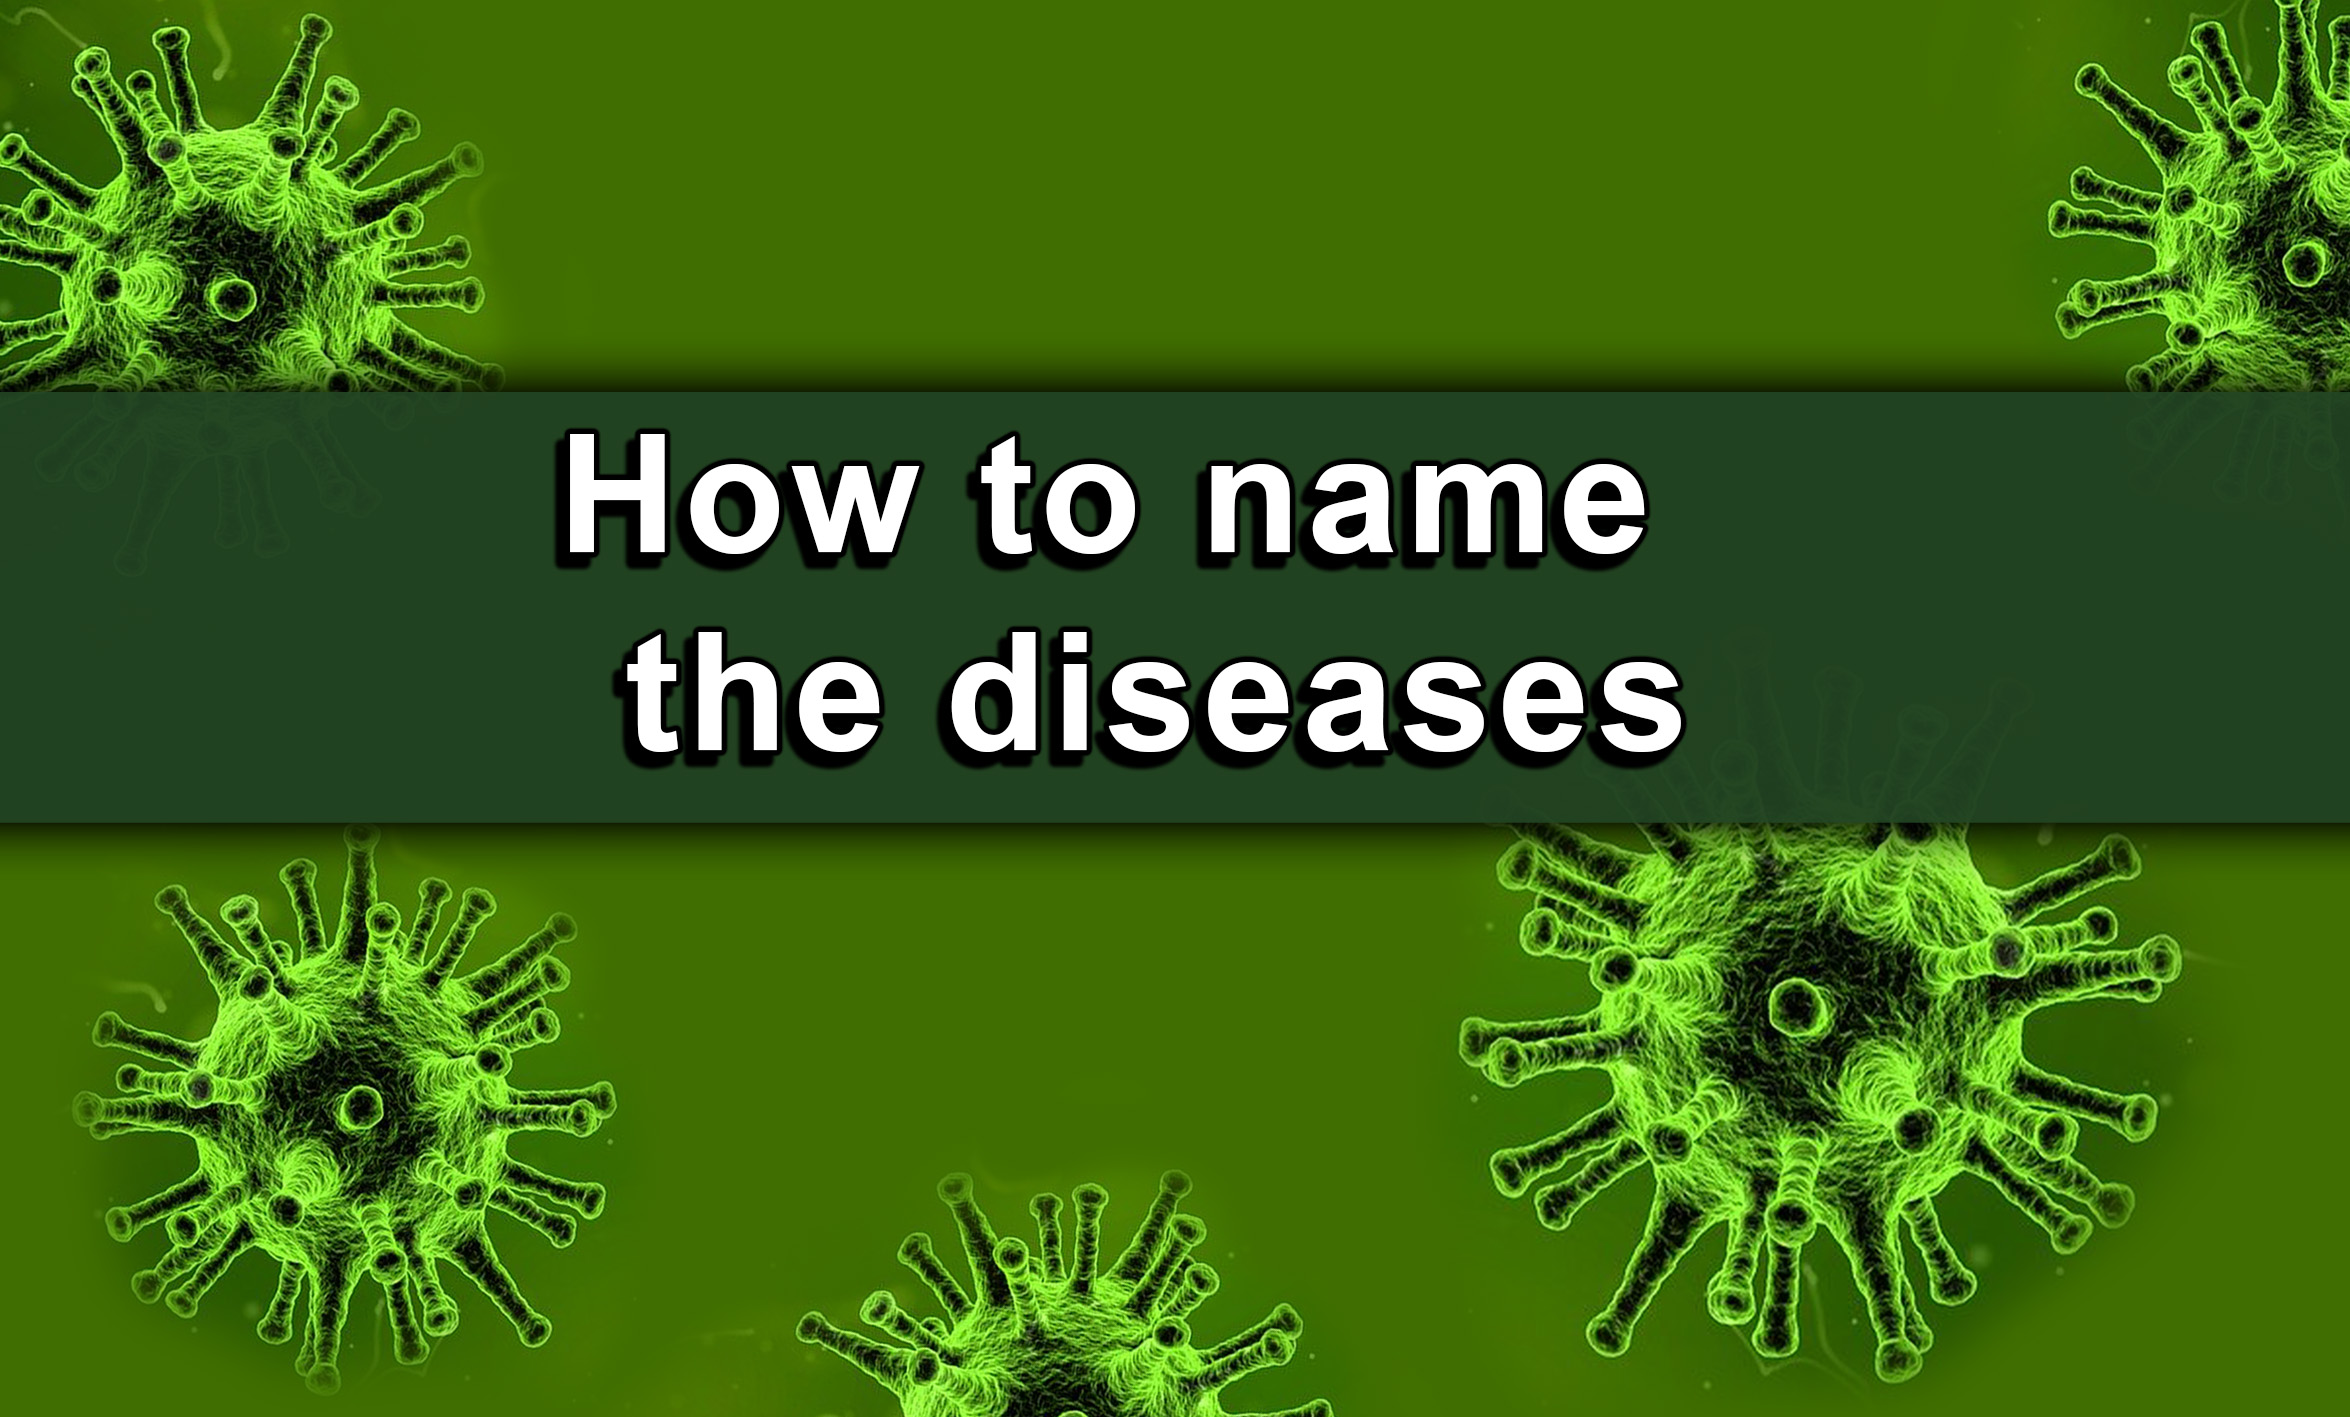 How to name the diseases